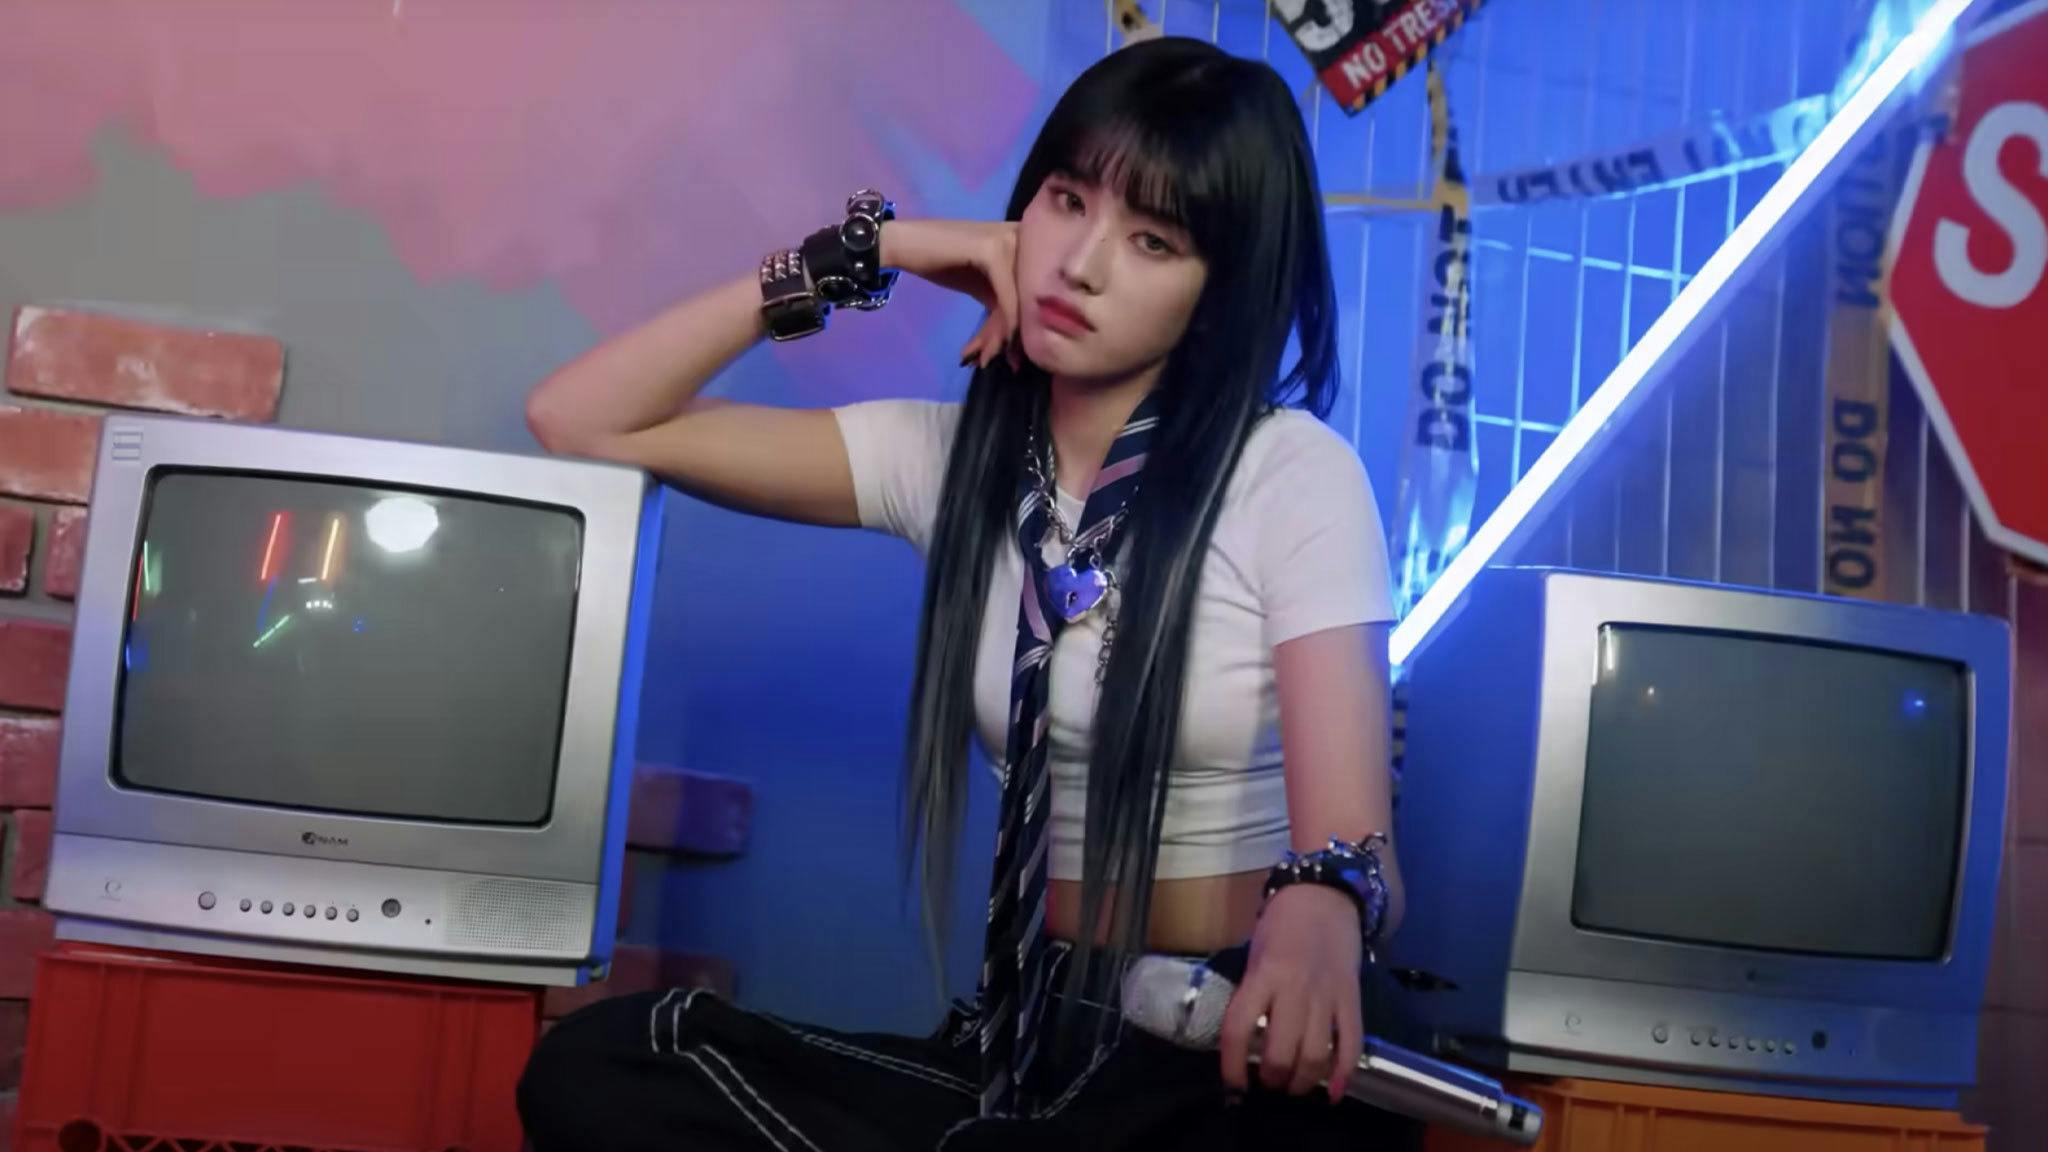 See STAYC’s Yoon cover Avril Lavigne’s Sk8er Boi